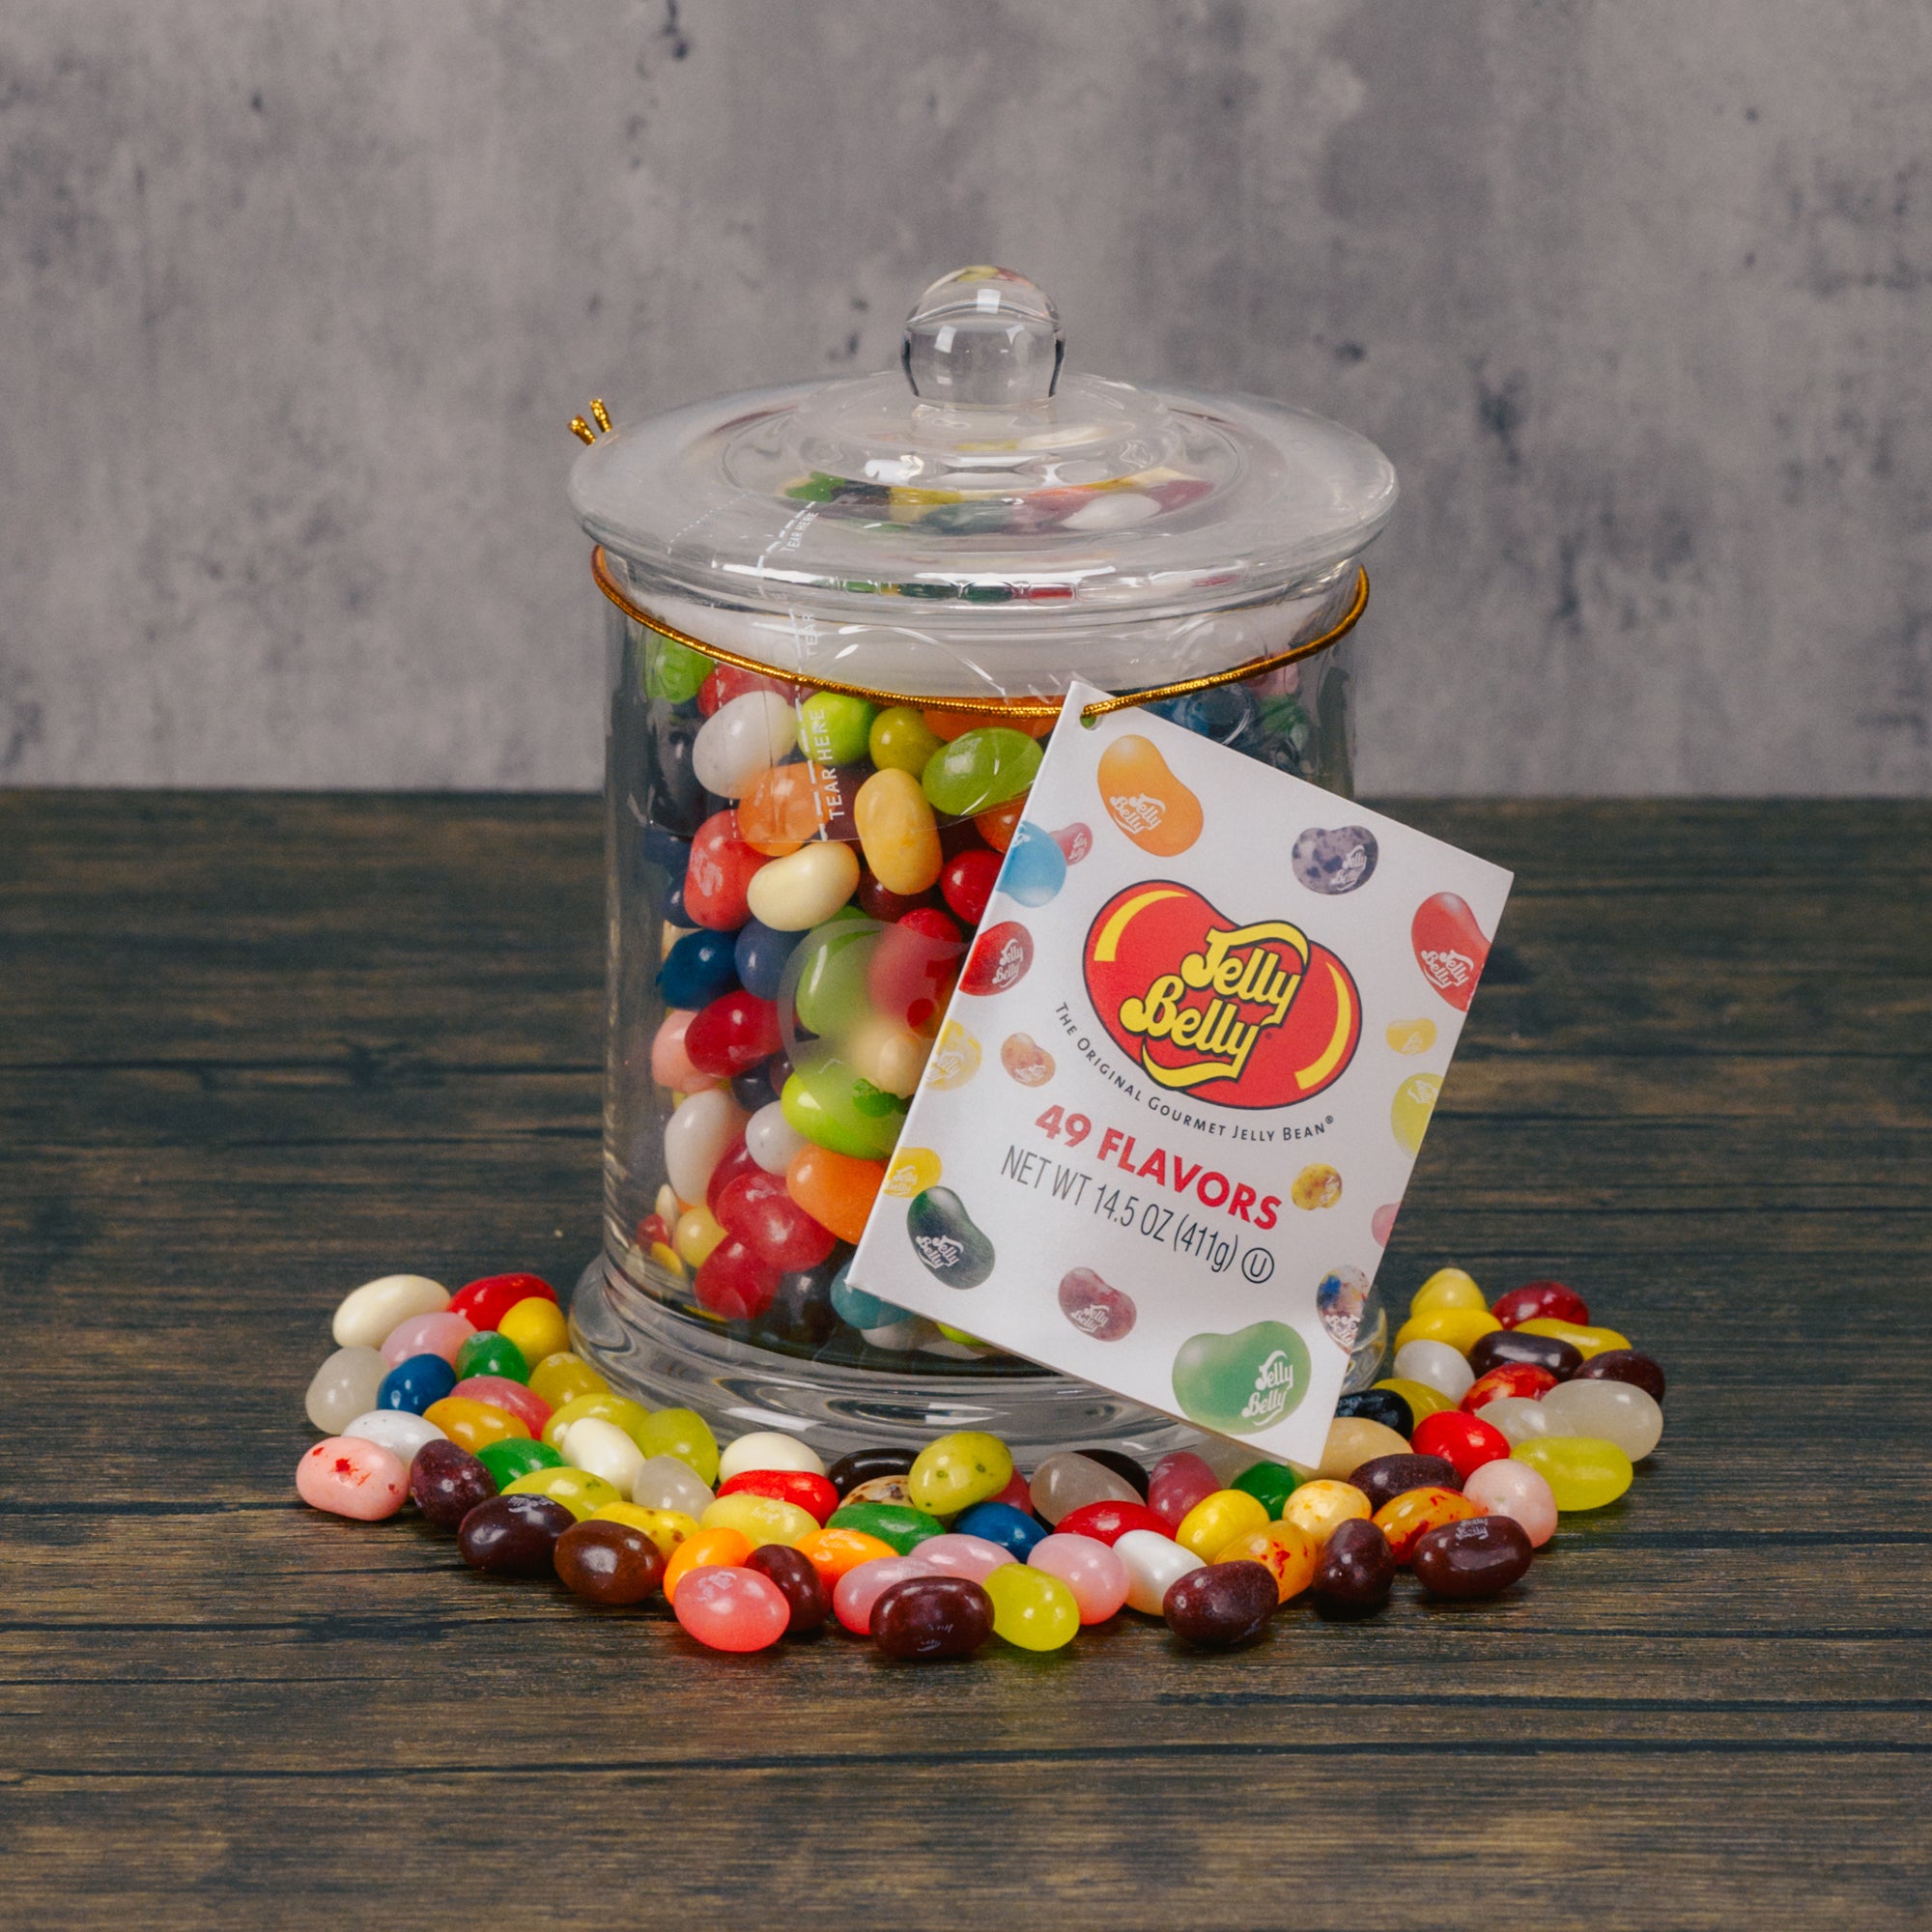 Marie's　oz.　Jar　Jelly　–　Candies　Belly　14.5